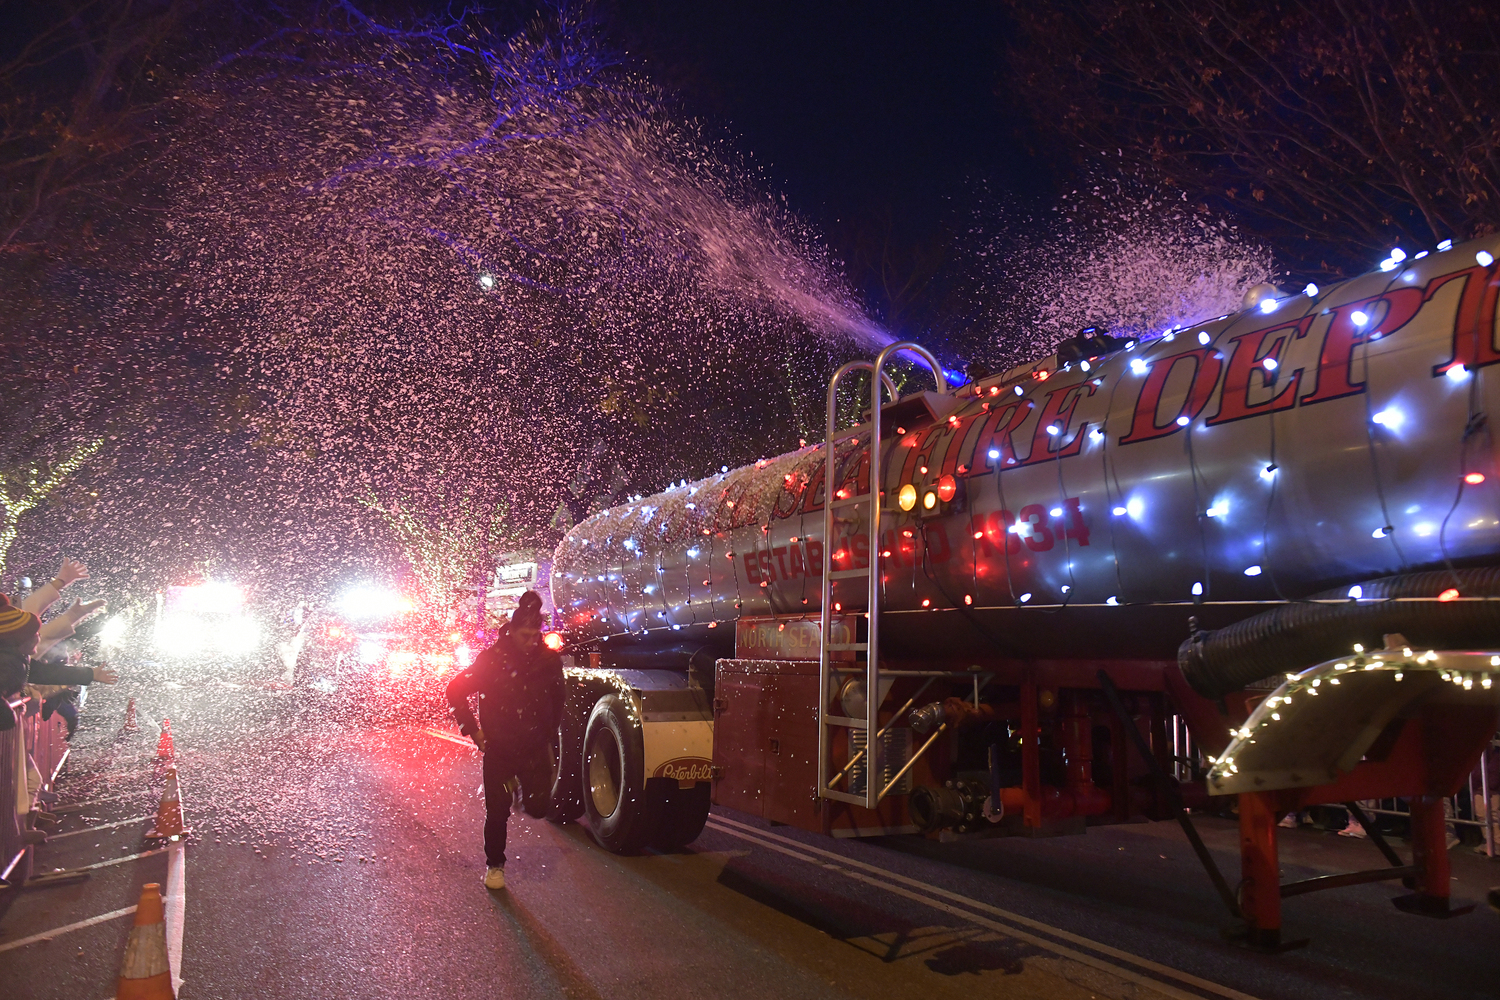 The North Sea Fire Department made it snow during 